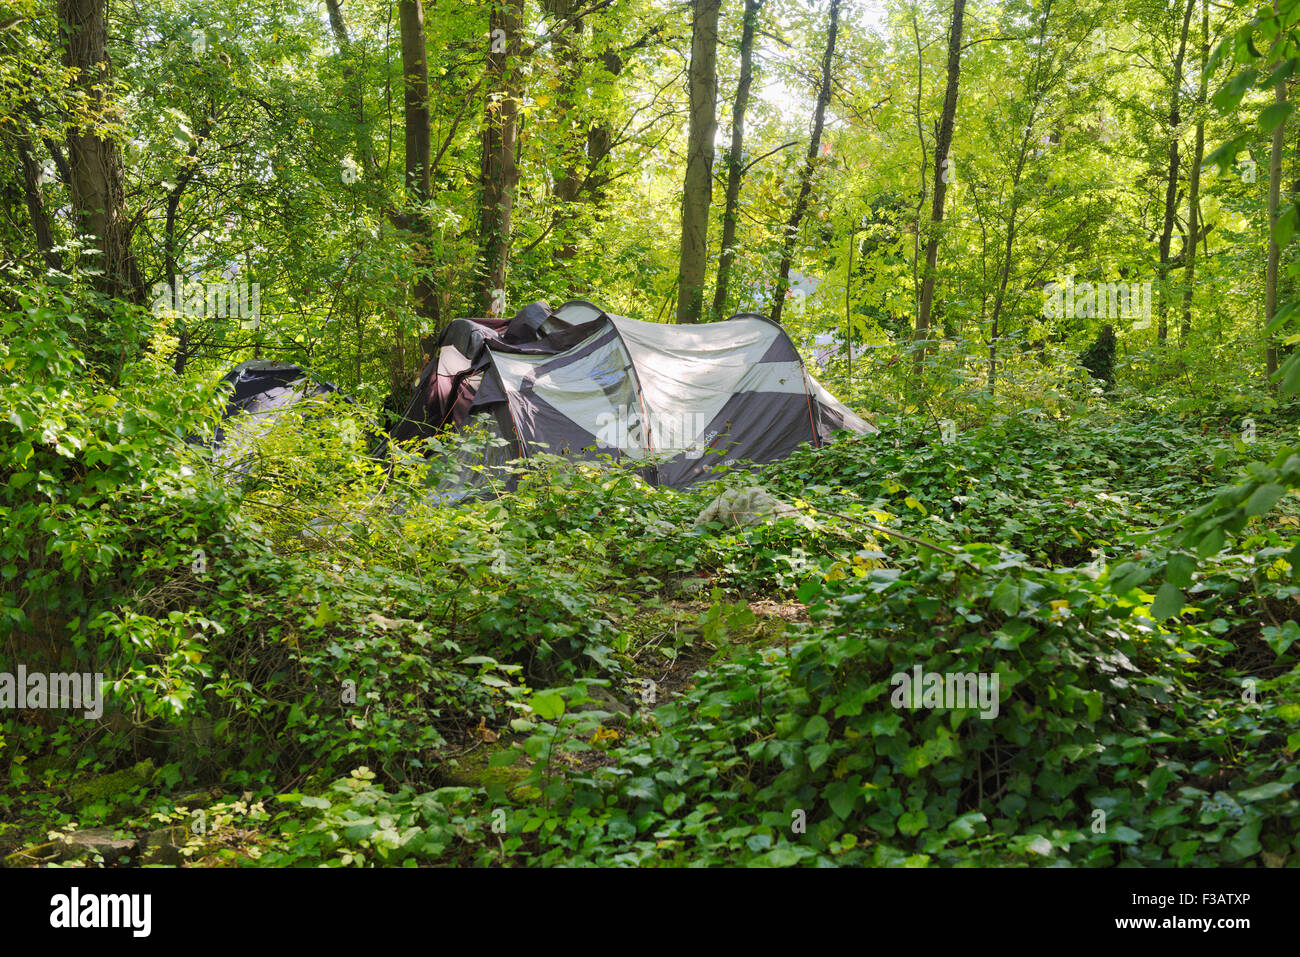 Homeless in the UK living in tent hidden among trees, Bristol England Stock Photo